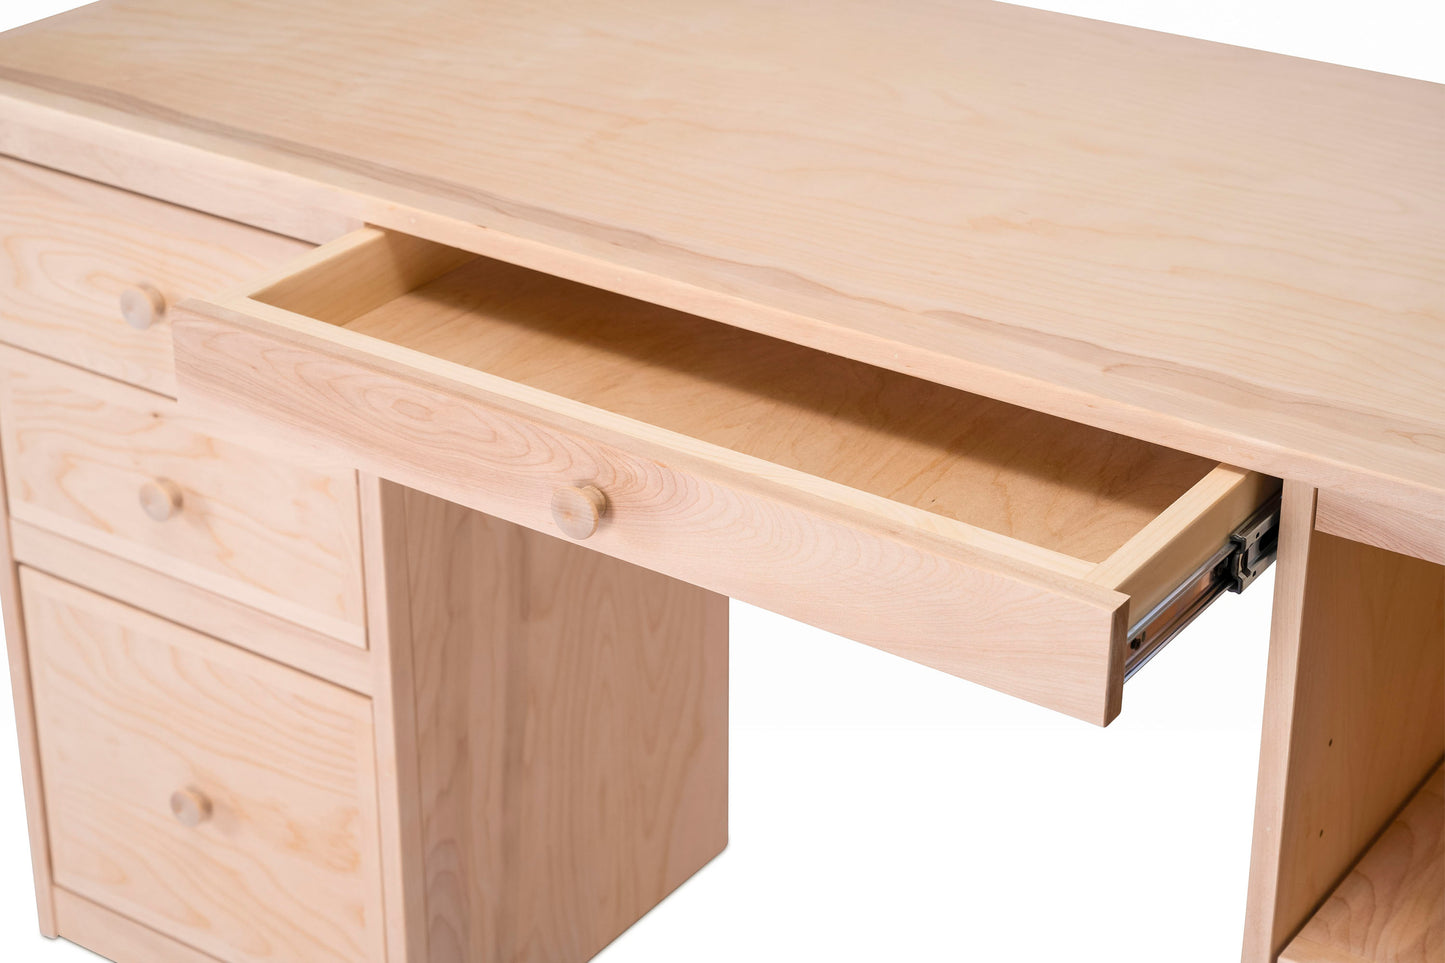 Berkshire Home Desk shown close up on wide drawer to show available storage space.